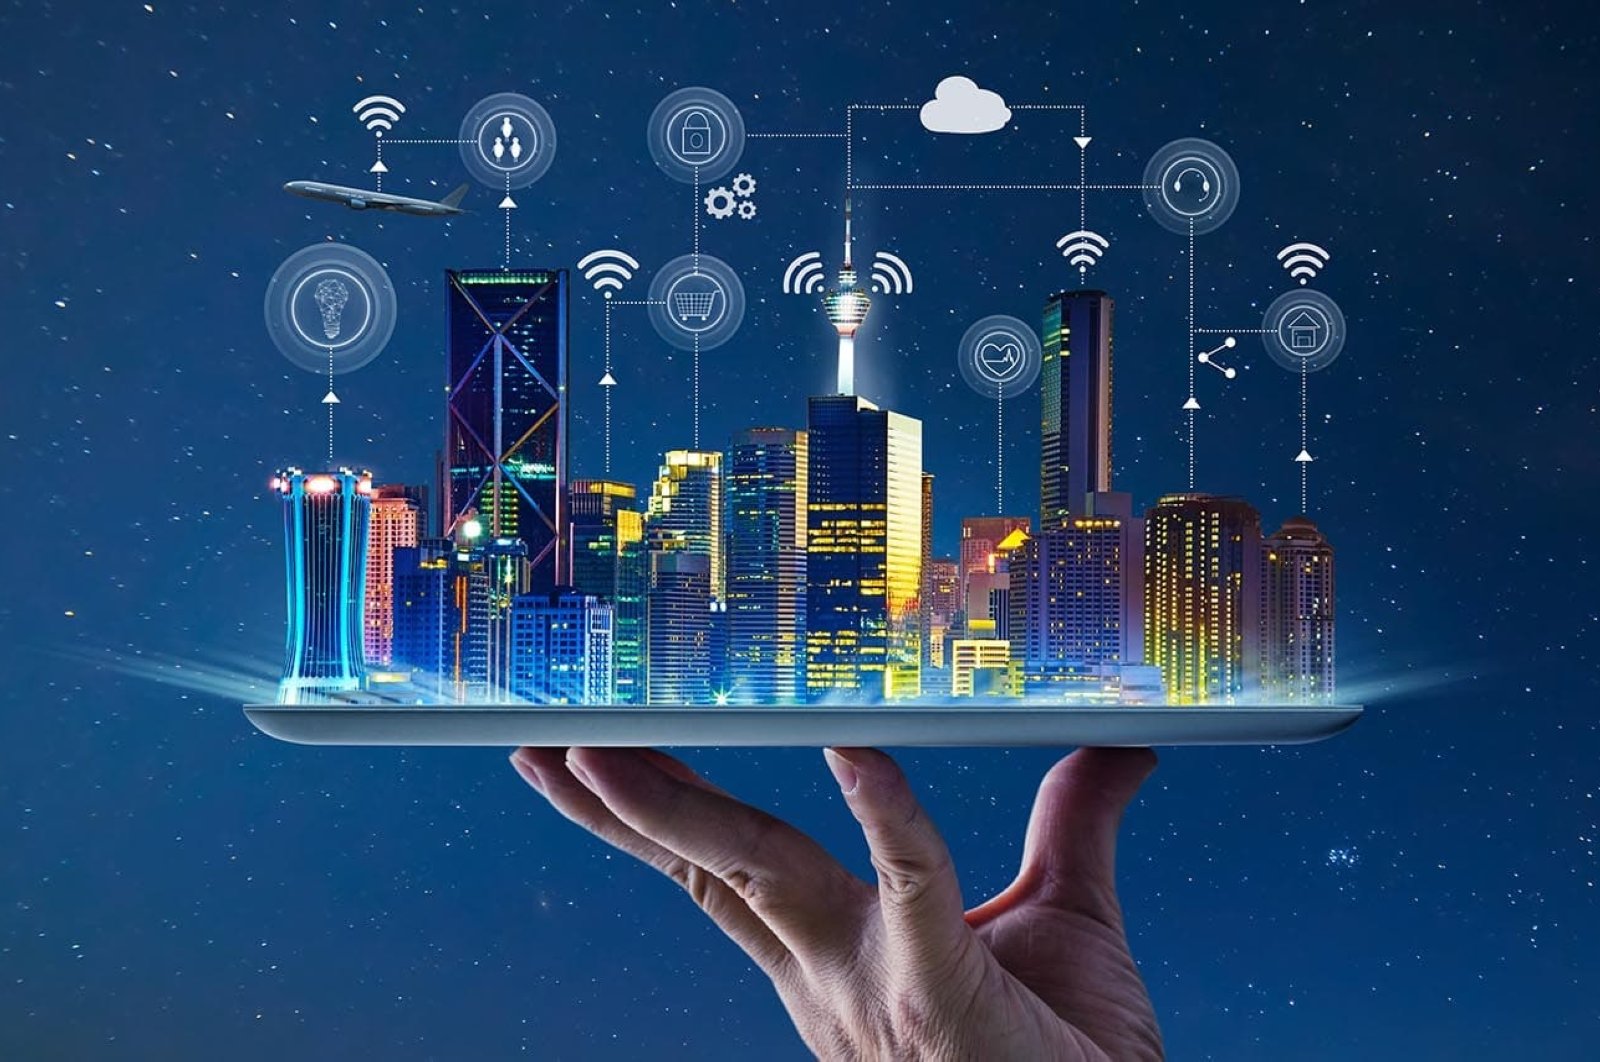 The Integration of Technology in Smart Homes and Smart Cities